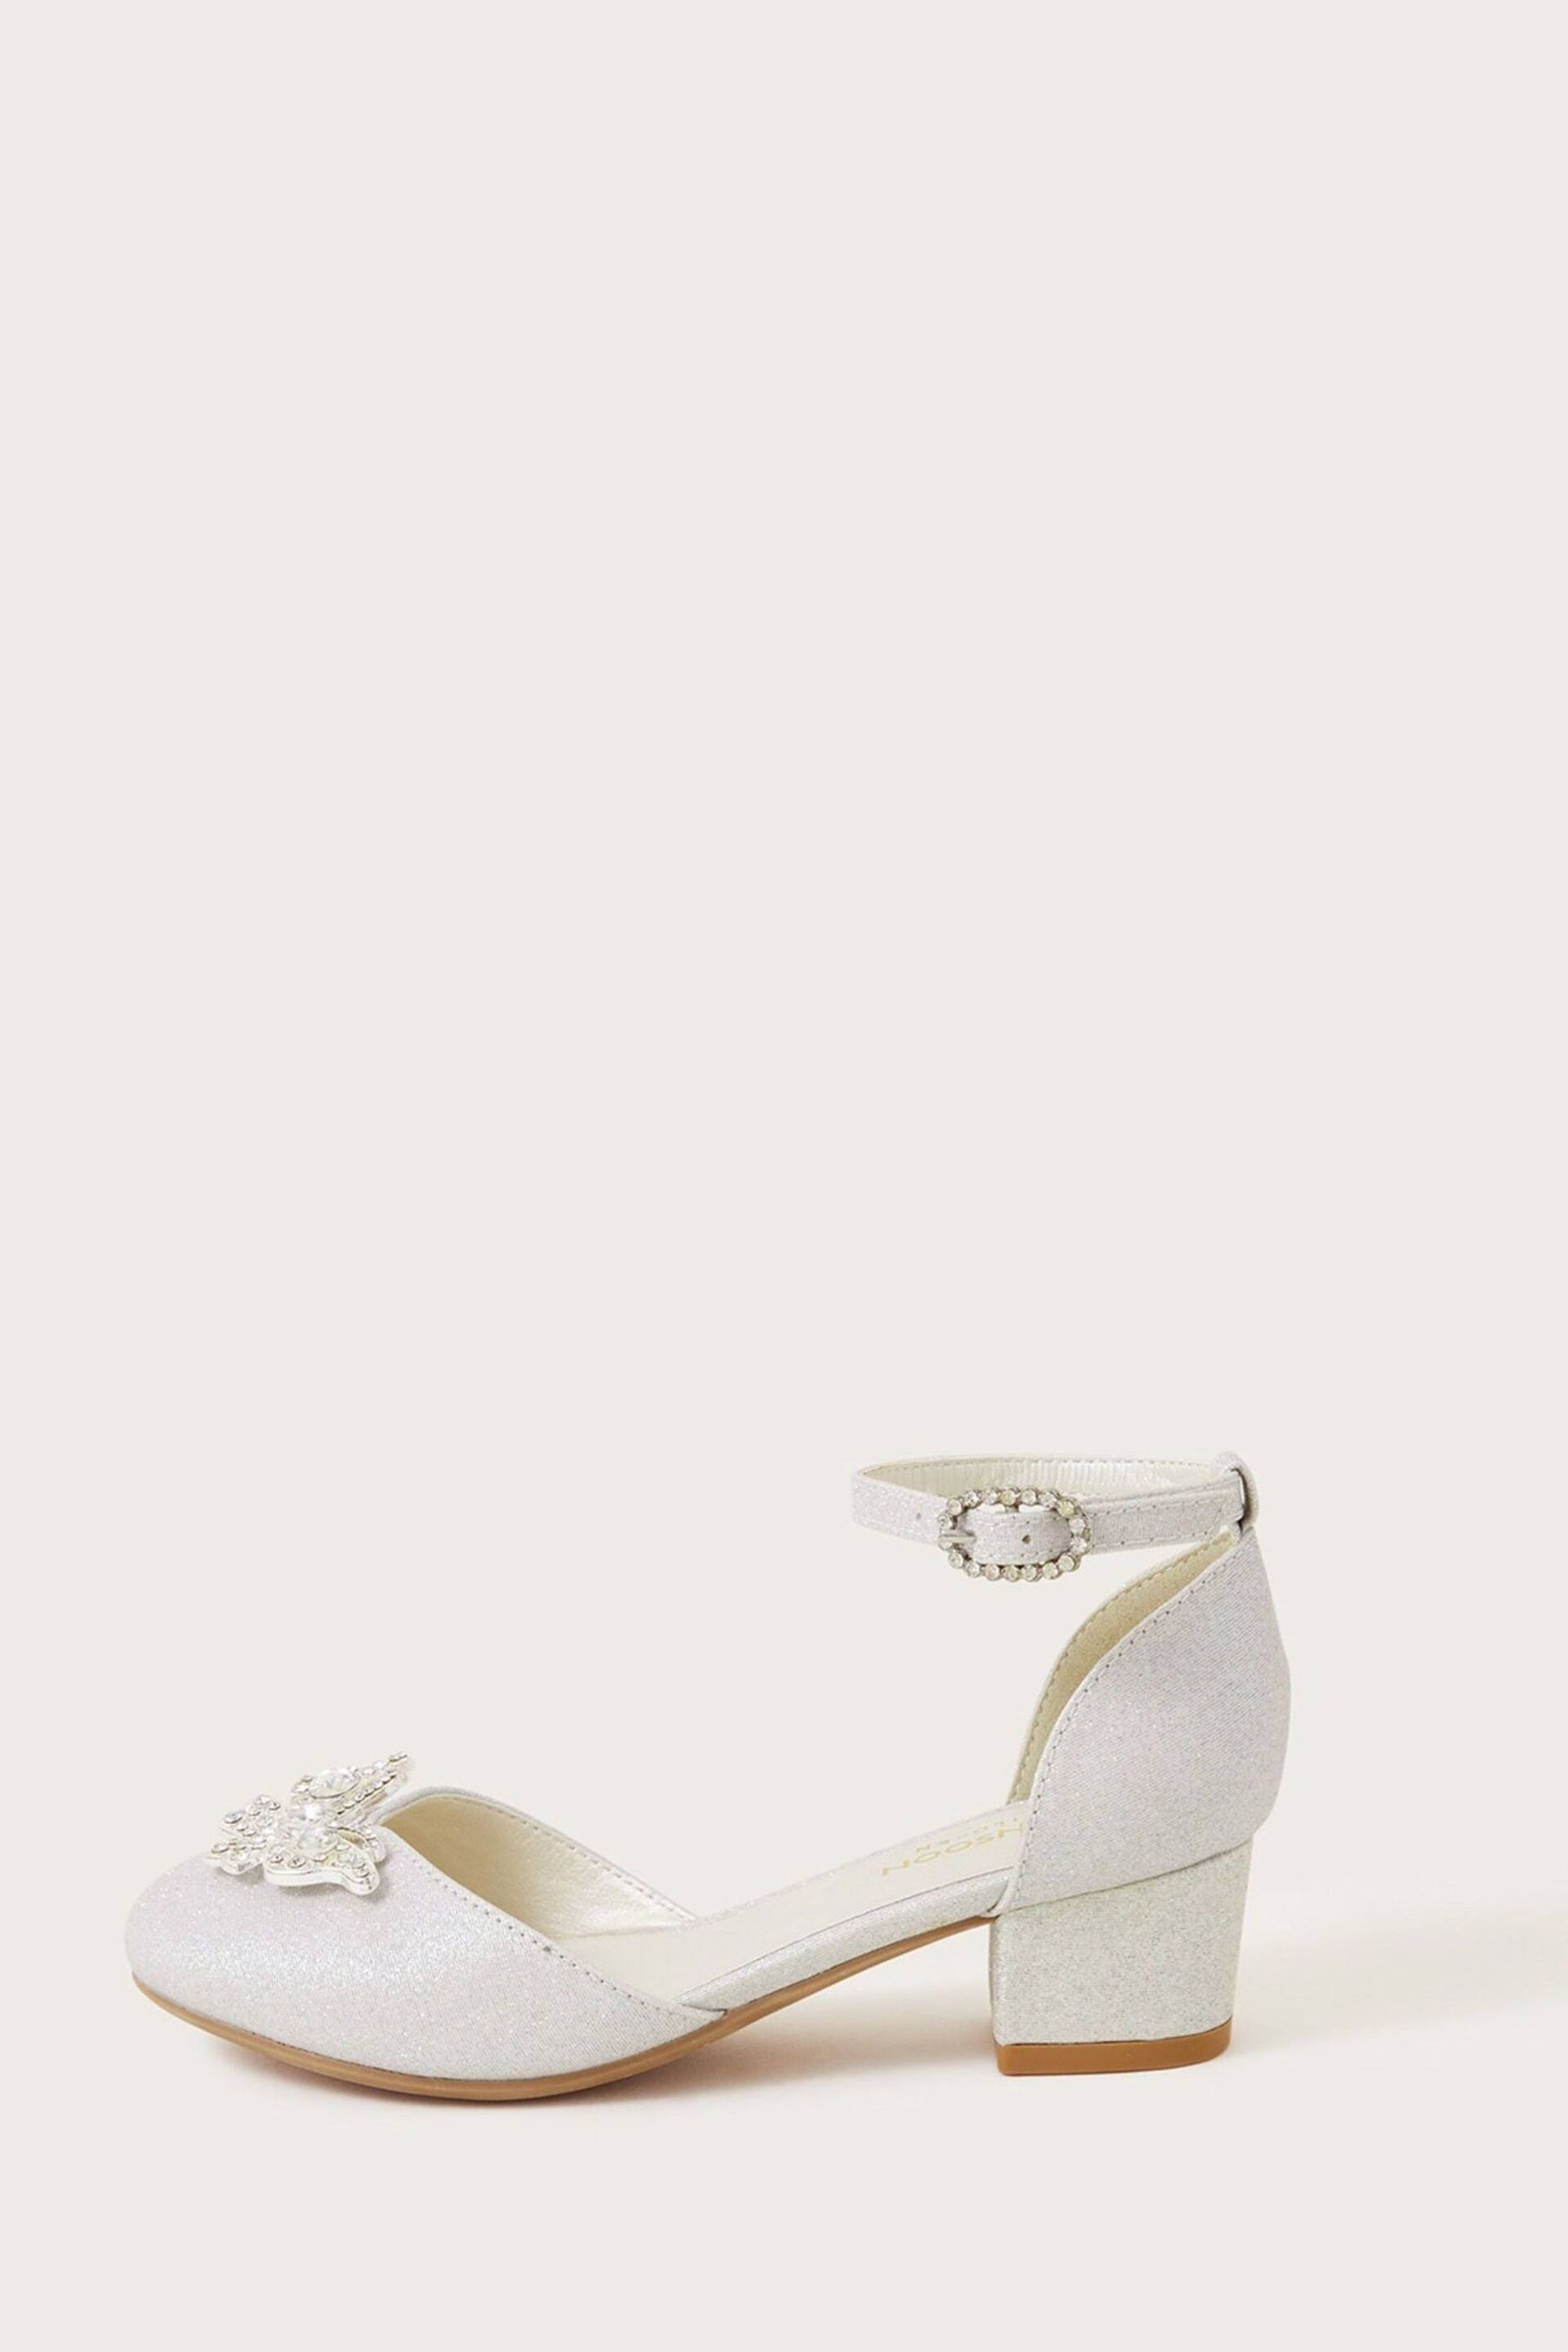 Monsoon Silver Butterfly Gem Two Part Heels - Image 1 of 3